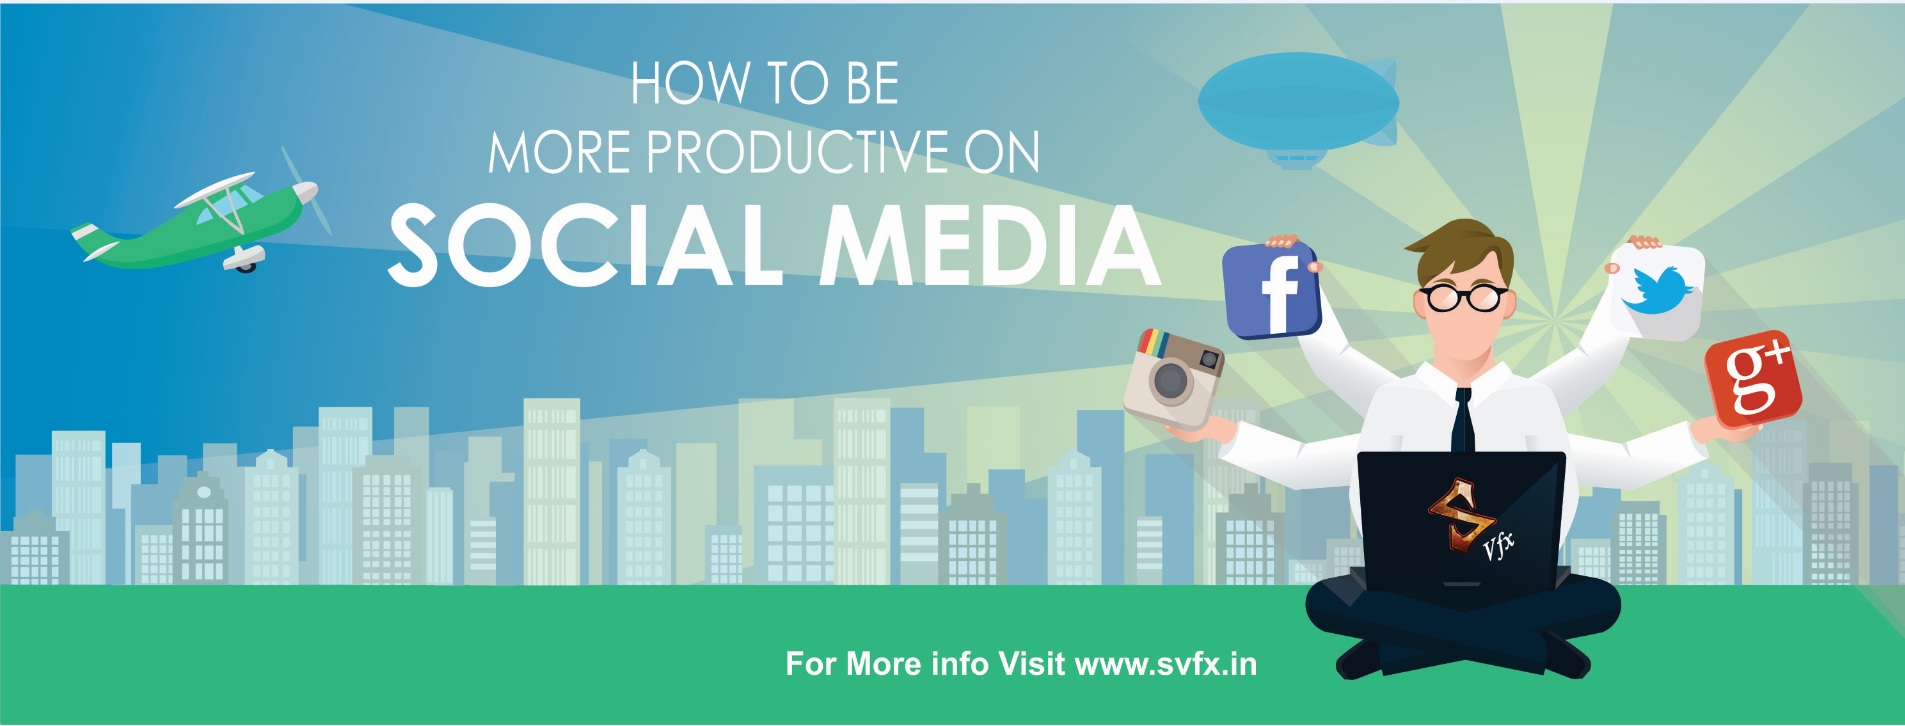 How To Be More Productive on social Media